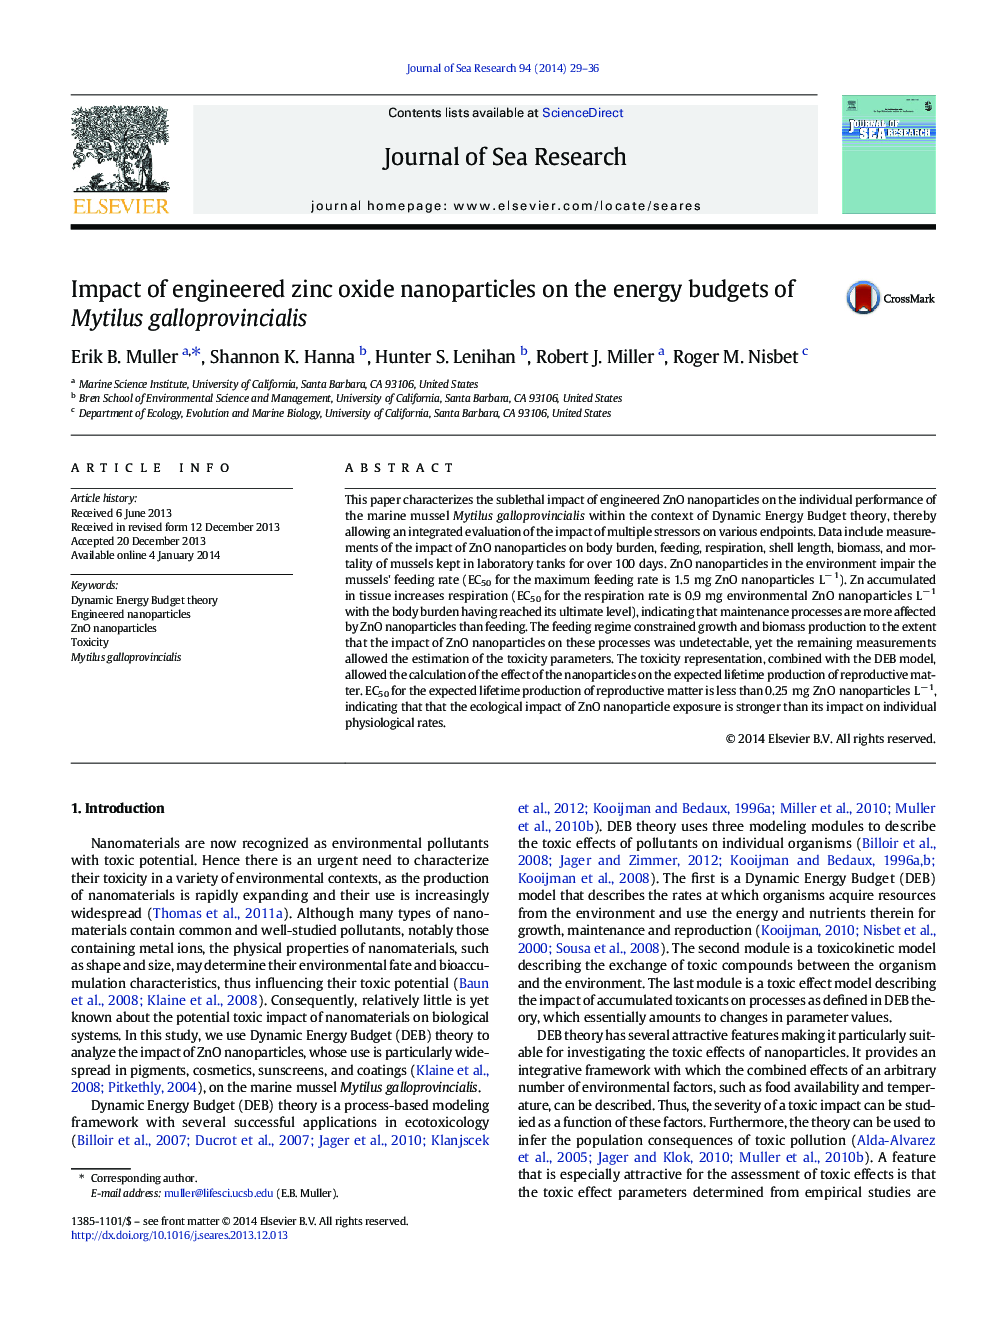 Impact of engineered zinc oxide nanoparticles on the energy budgets of Mytilus galloprovincialis